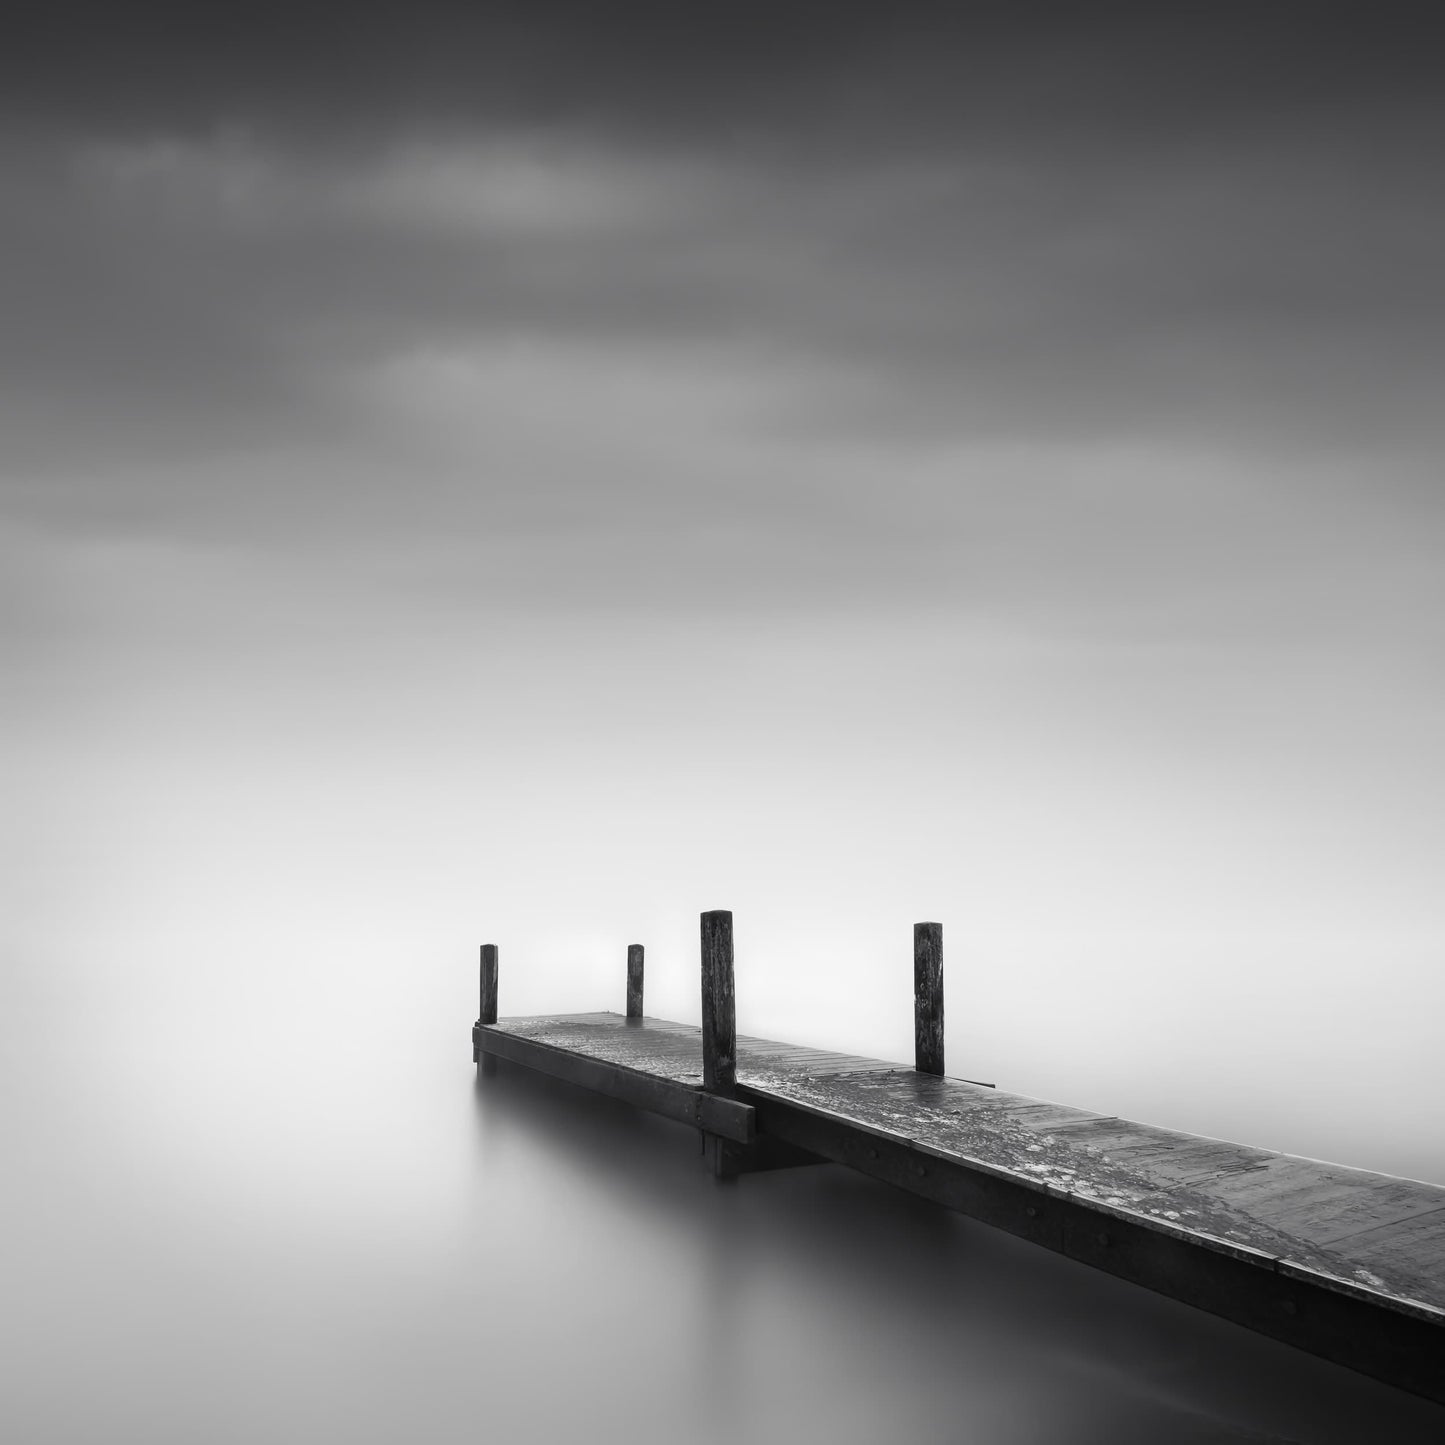 The artpiece 'Shadows of Silence' by Marco Maljaars shows a wooden catwalk, on top of a silent mysterious lake. Shot in black and white.